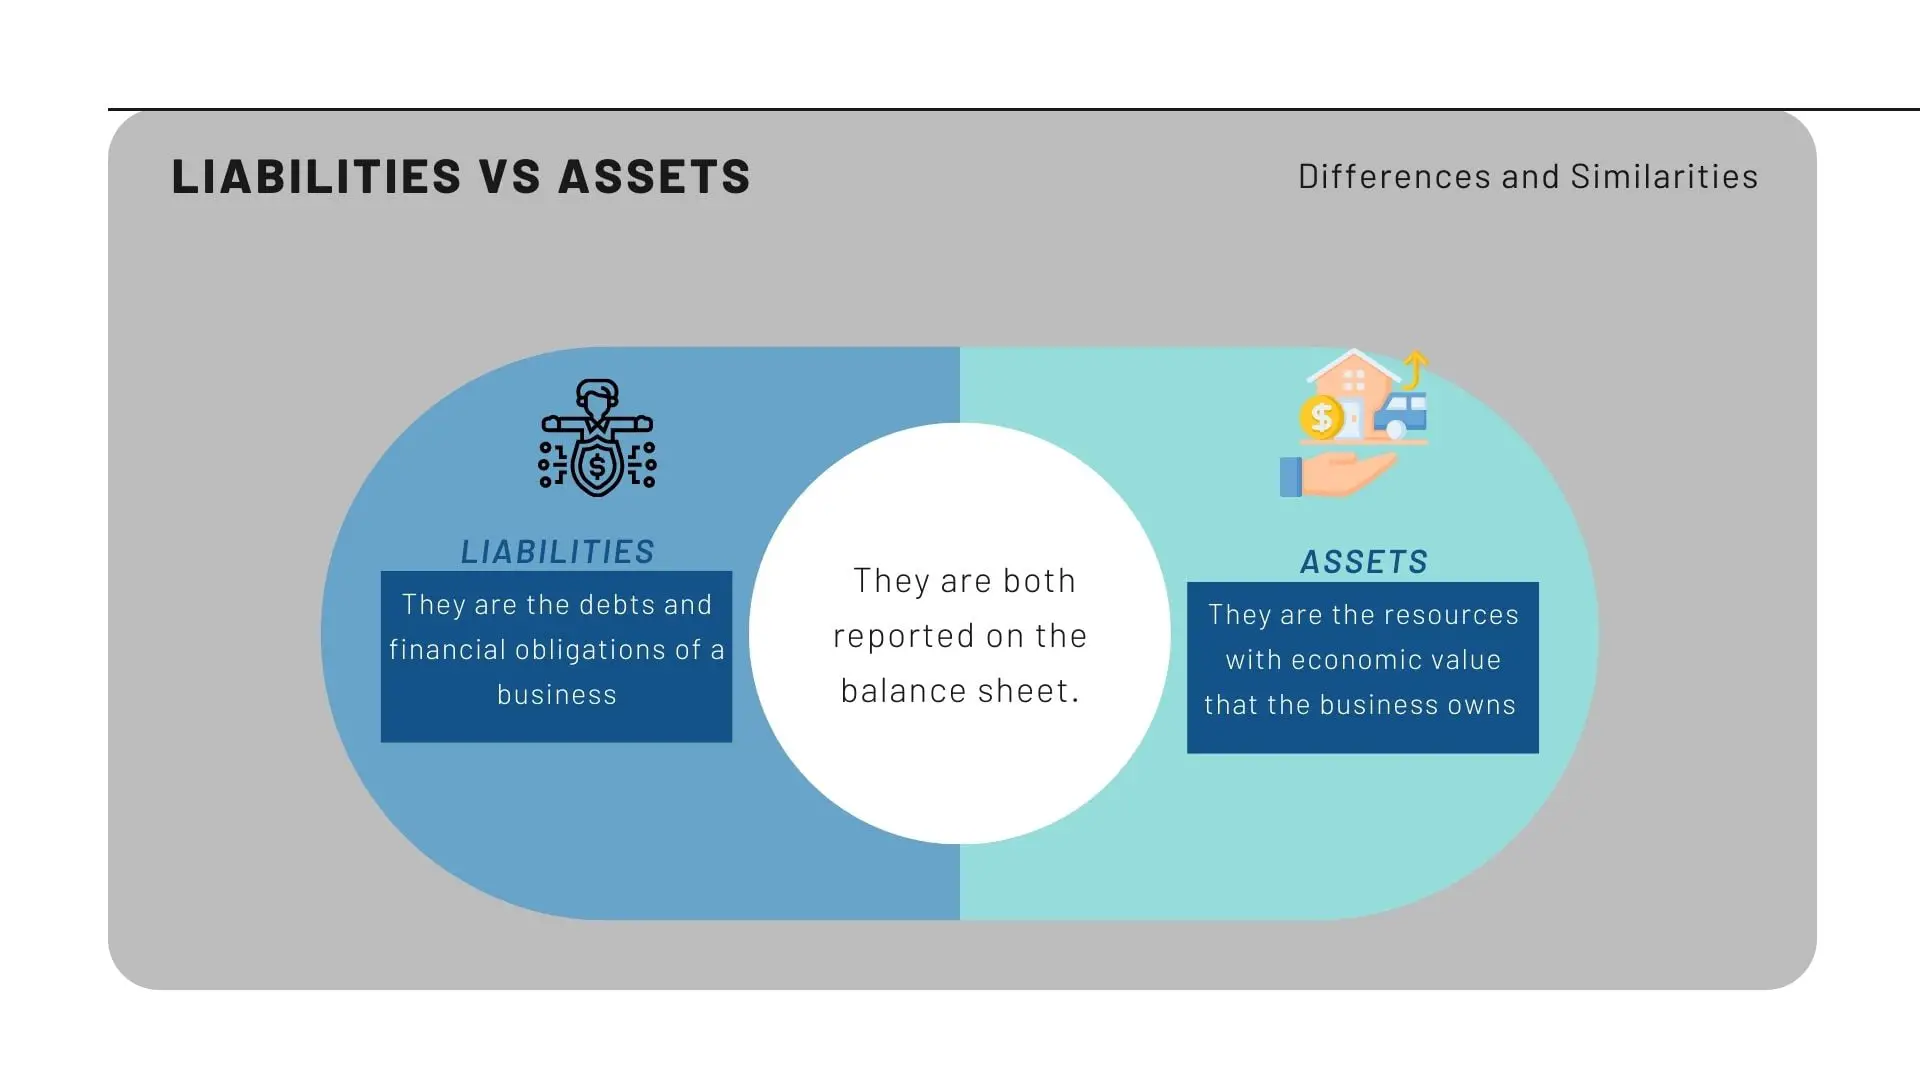 Liabilities vs assets differences and similarities